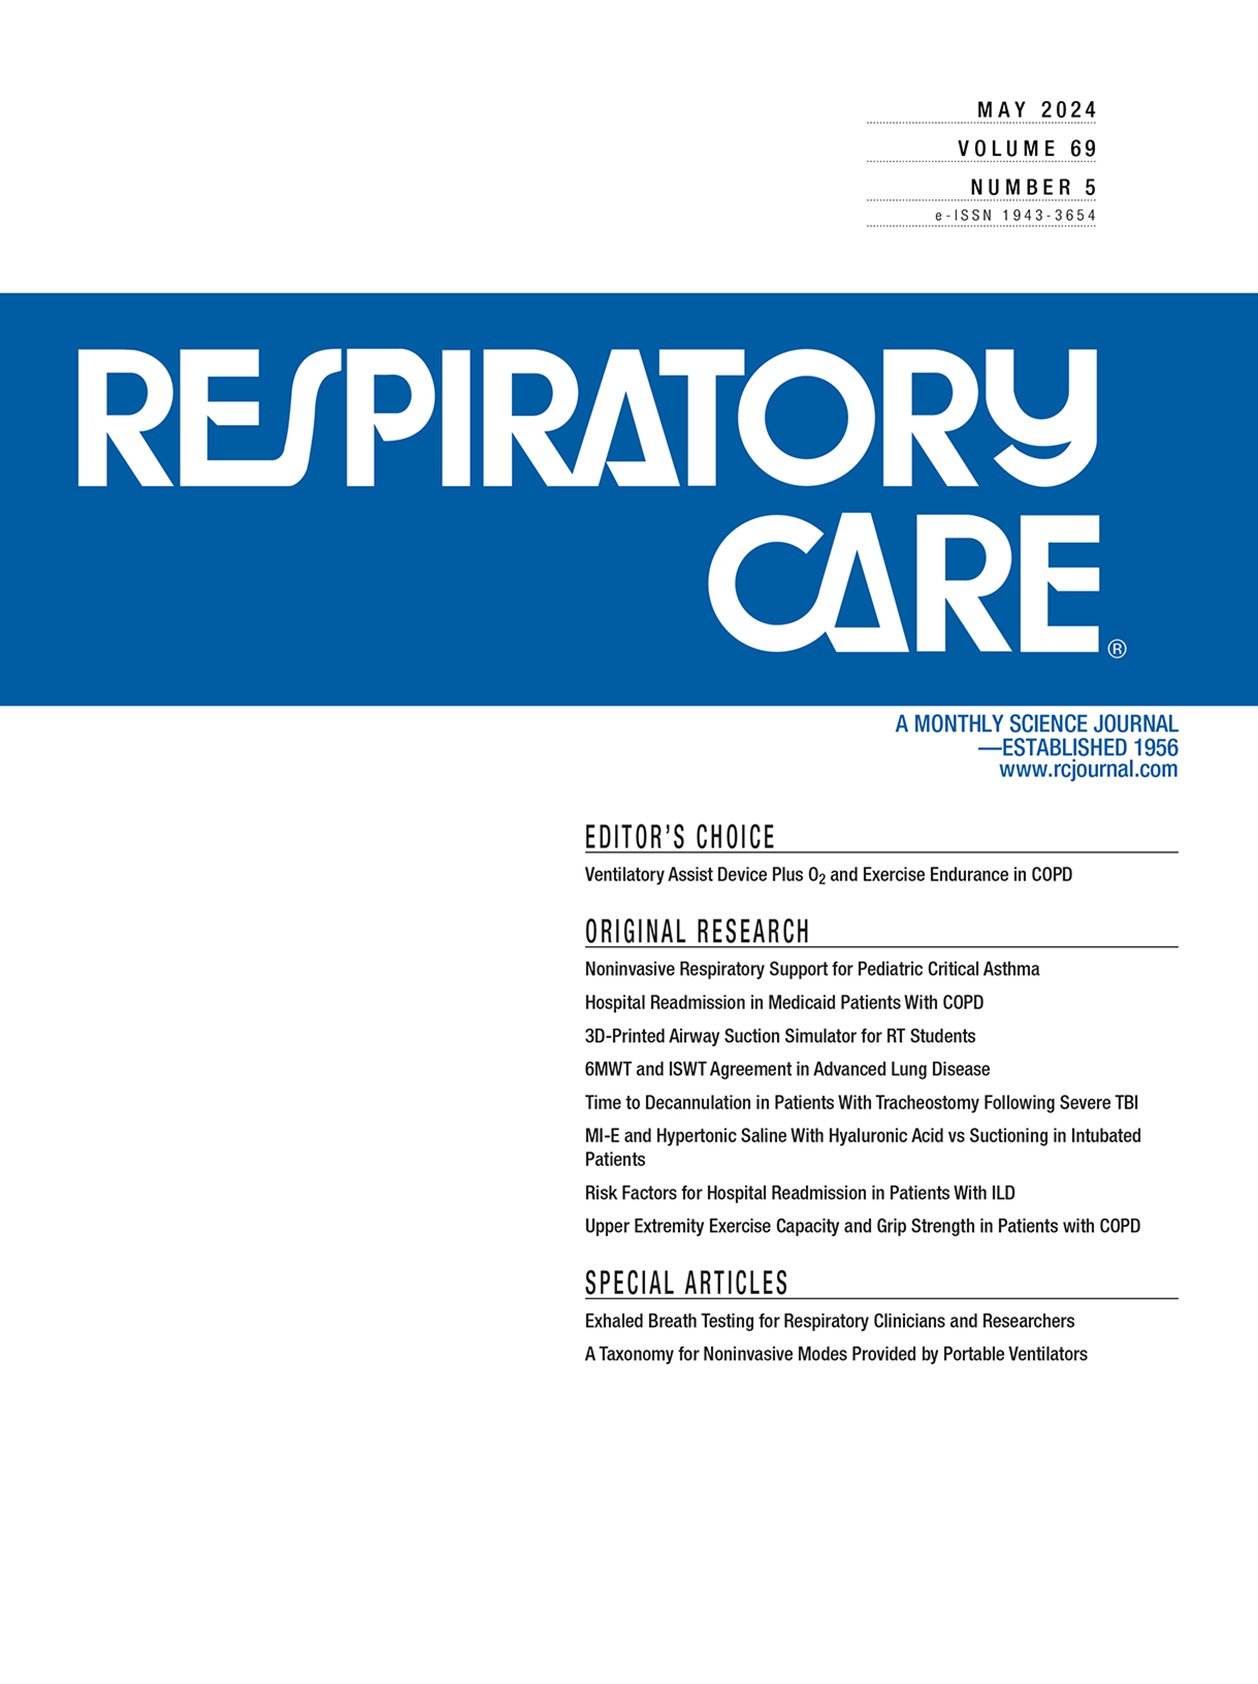 Development of a Cost-Effective 3D-Printed Airway Suction Simulator for Respiratory Therapy Students